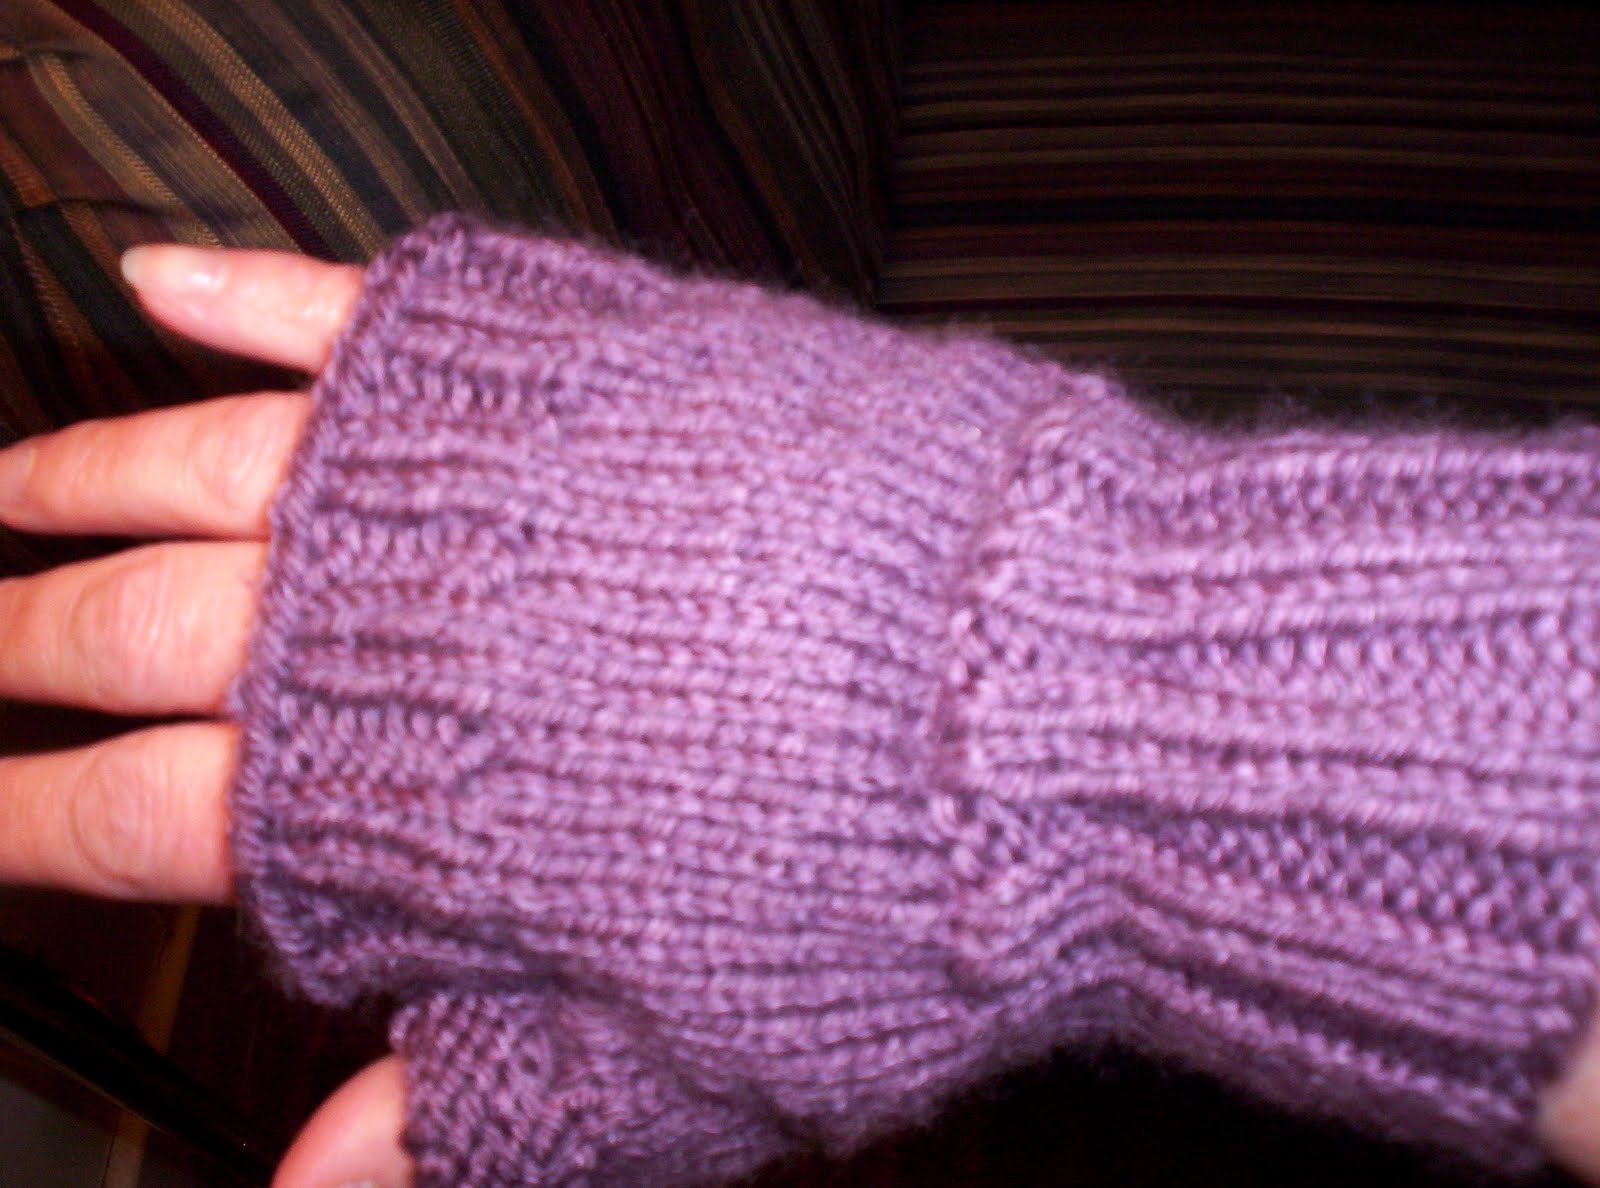 We
lted Fingerless Gloves - Ravelry - a knit and crochet community